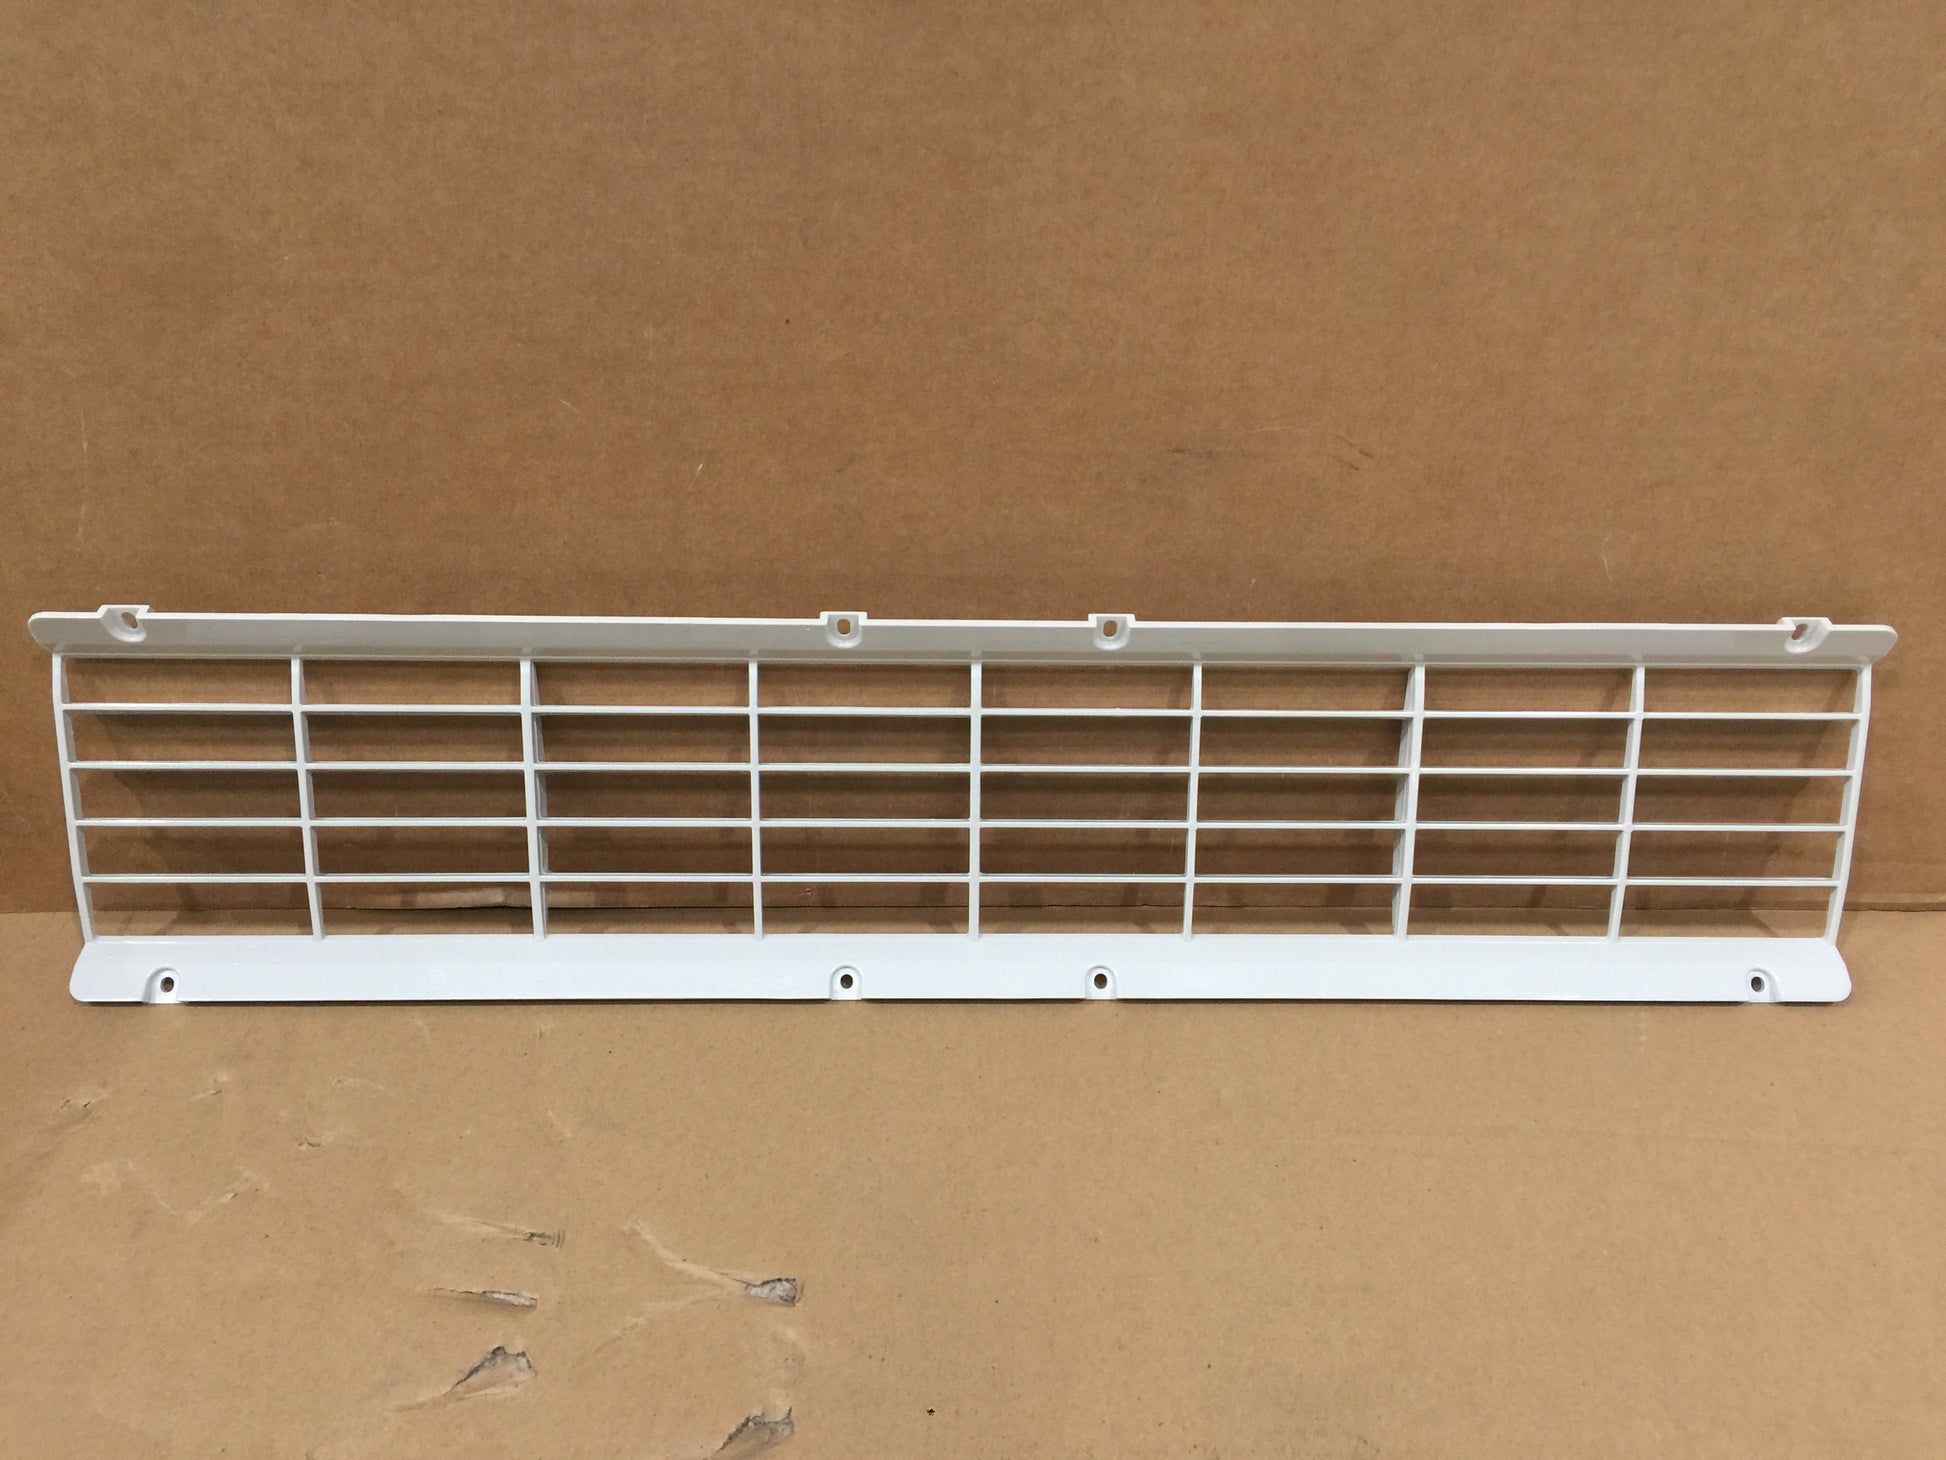 GRILLE; DISCHARGE, OUTDOOR FAN GRILLE FOR CENTRAL AIR CONDITONER